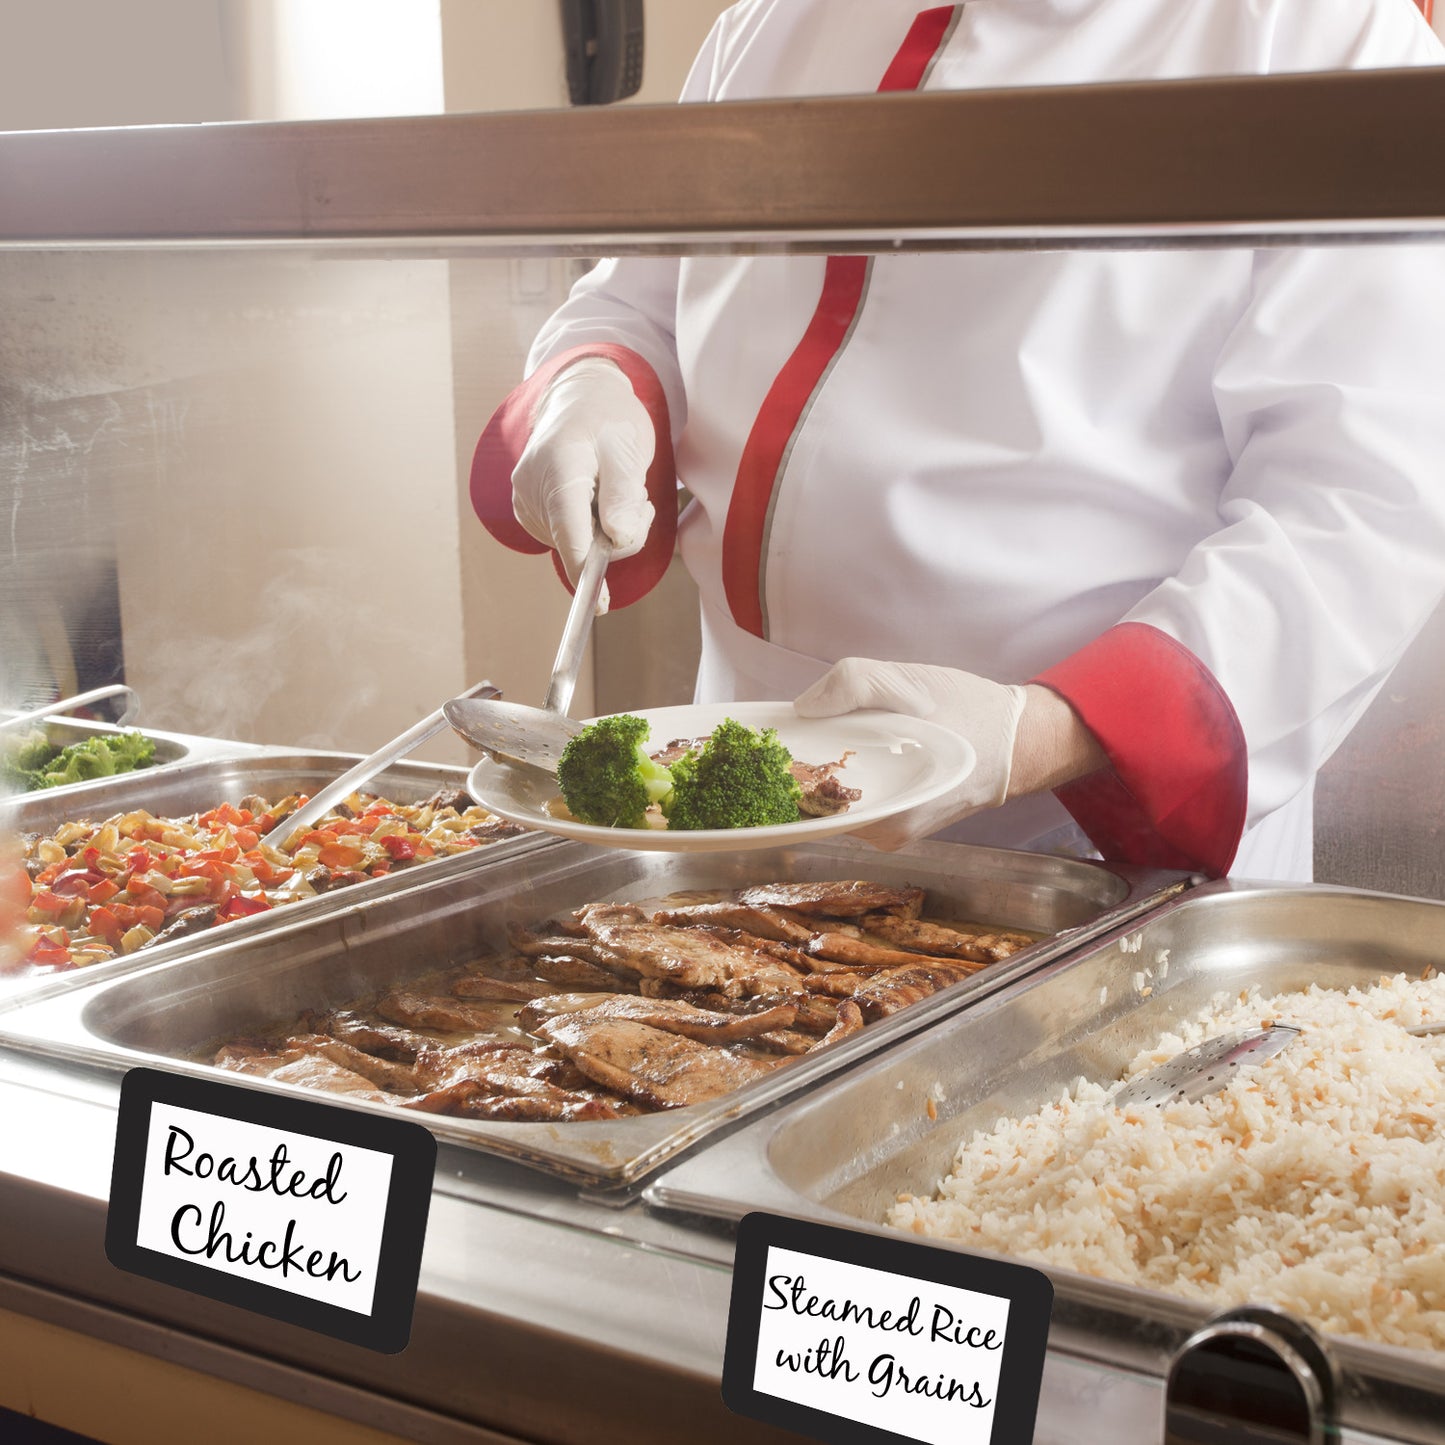 Dry Erase Self-Stick Adhesive Signage for the Food Service Industry